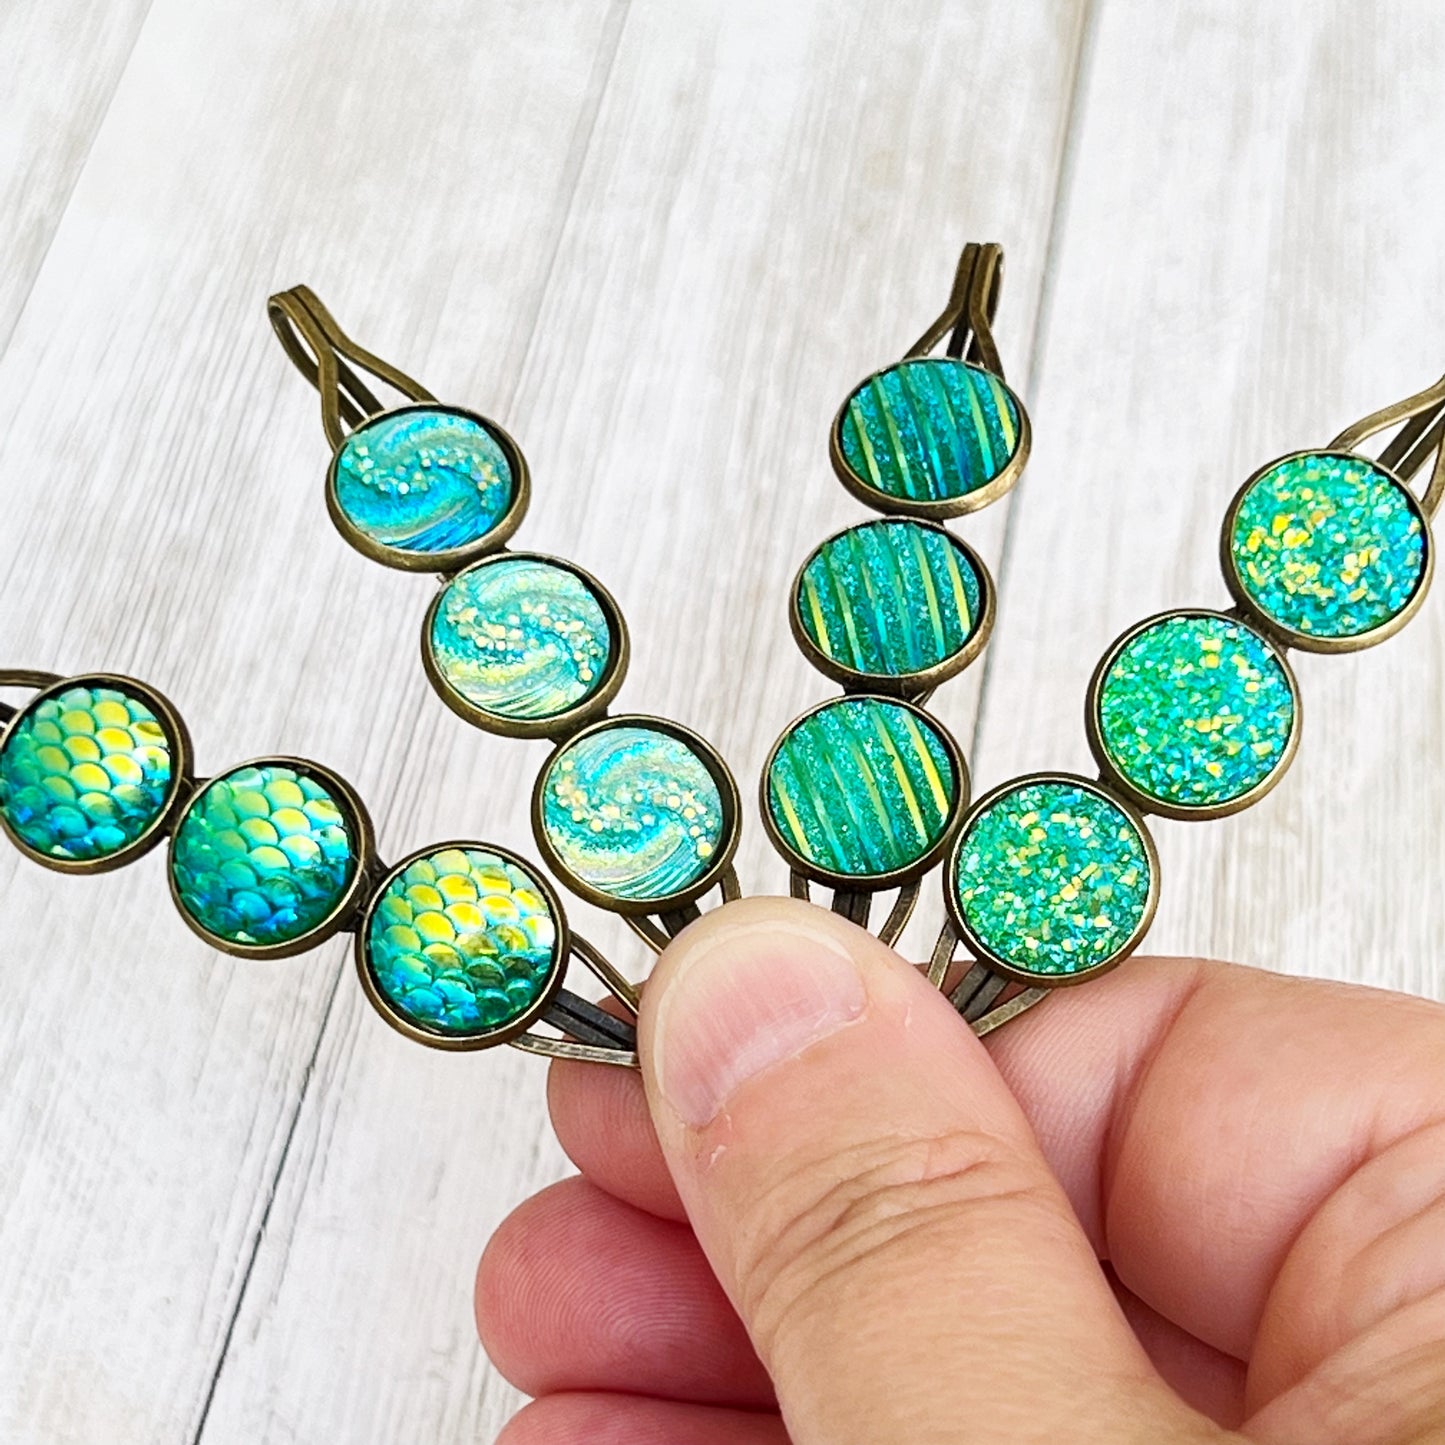 Green Glitter Druzy Hair Pin Set - Set of 4 with Unique Pattern Designs